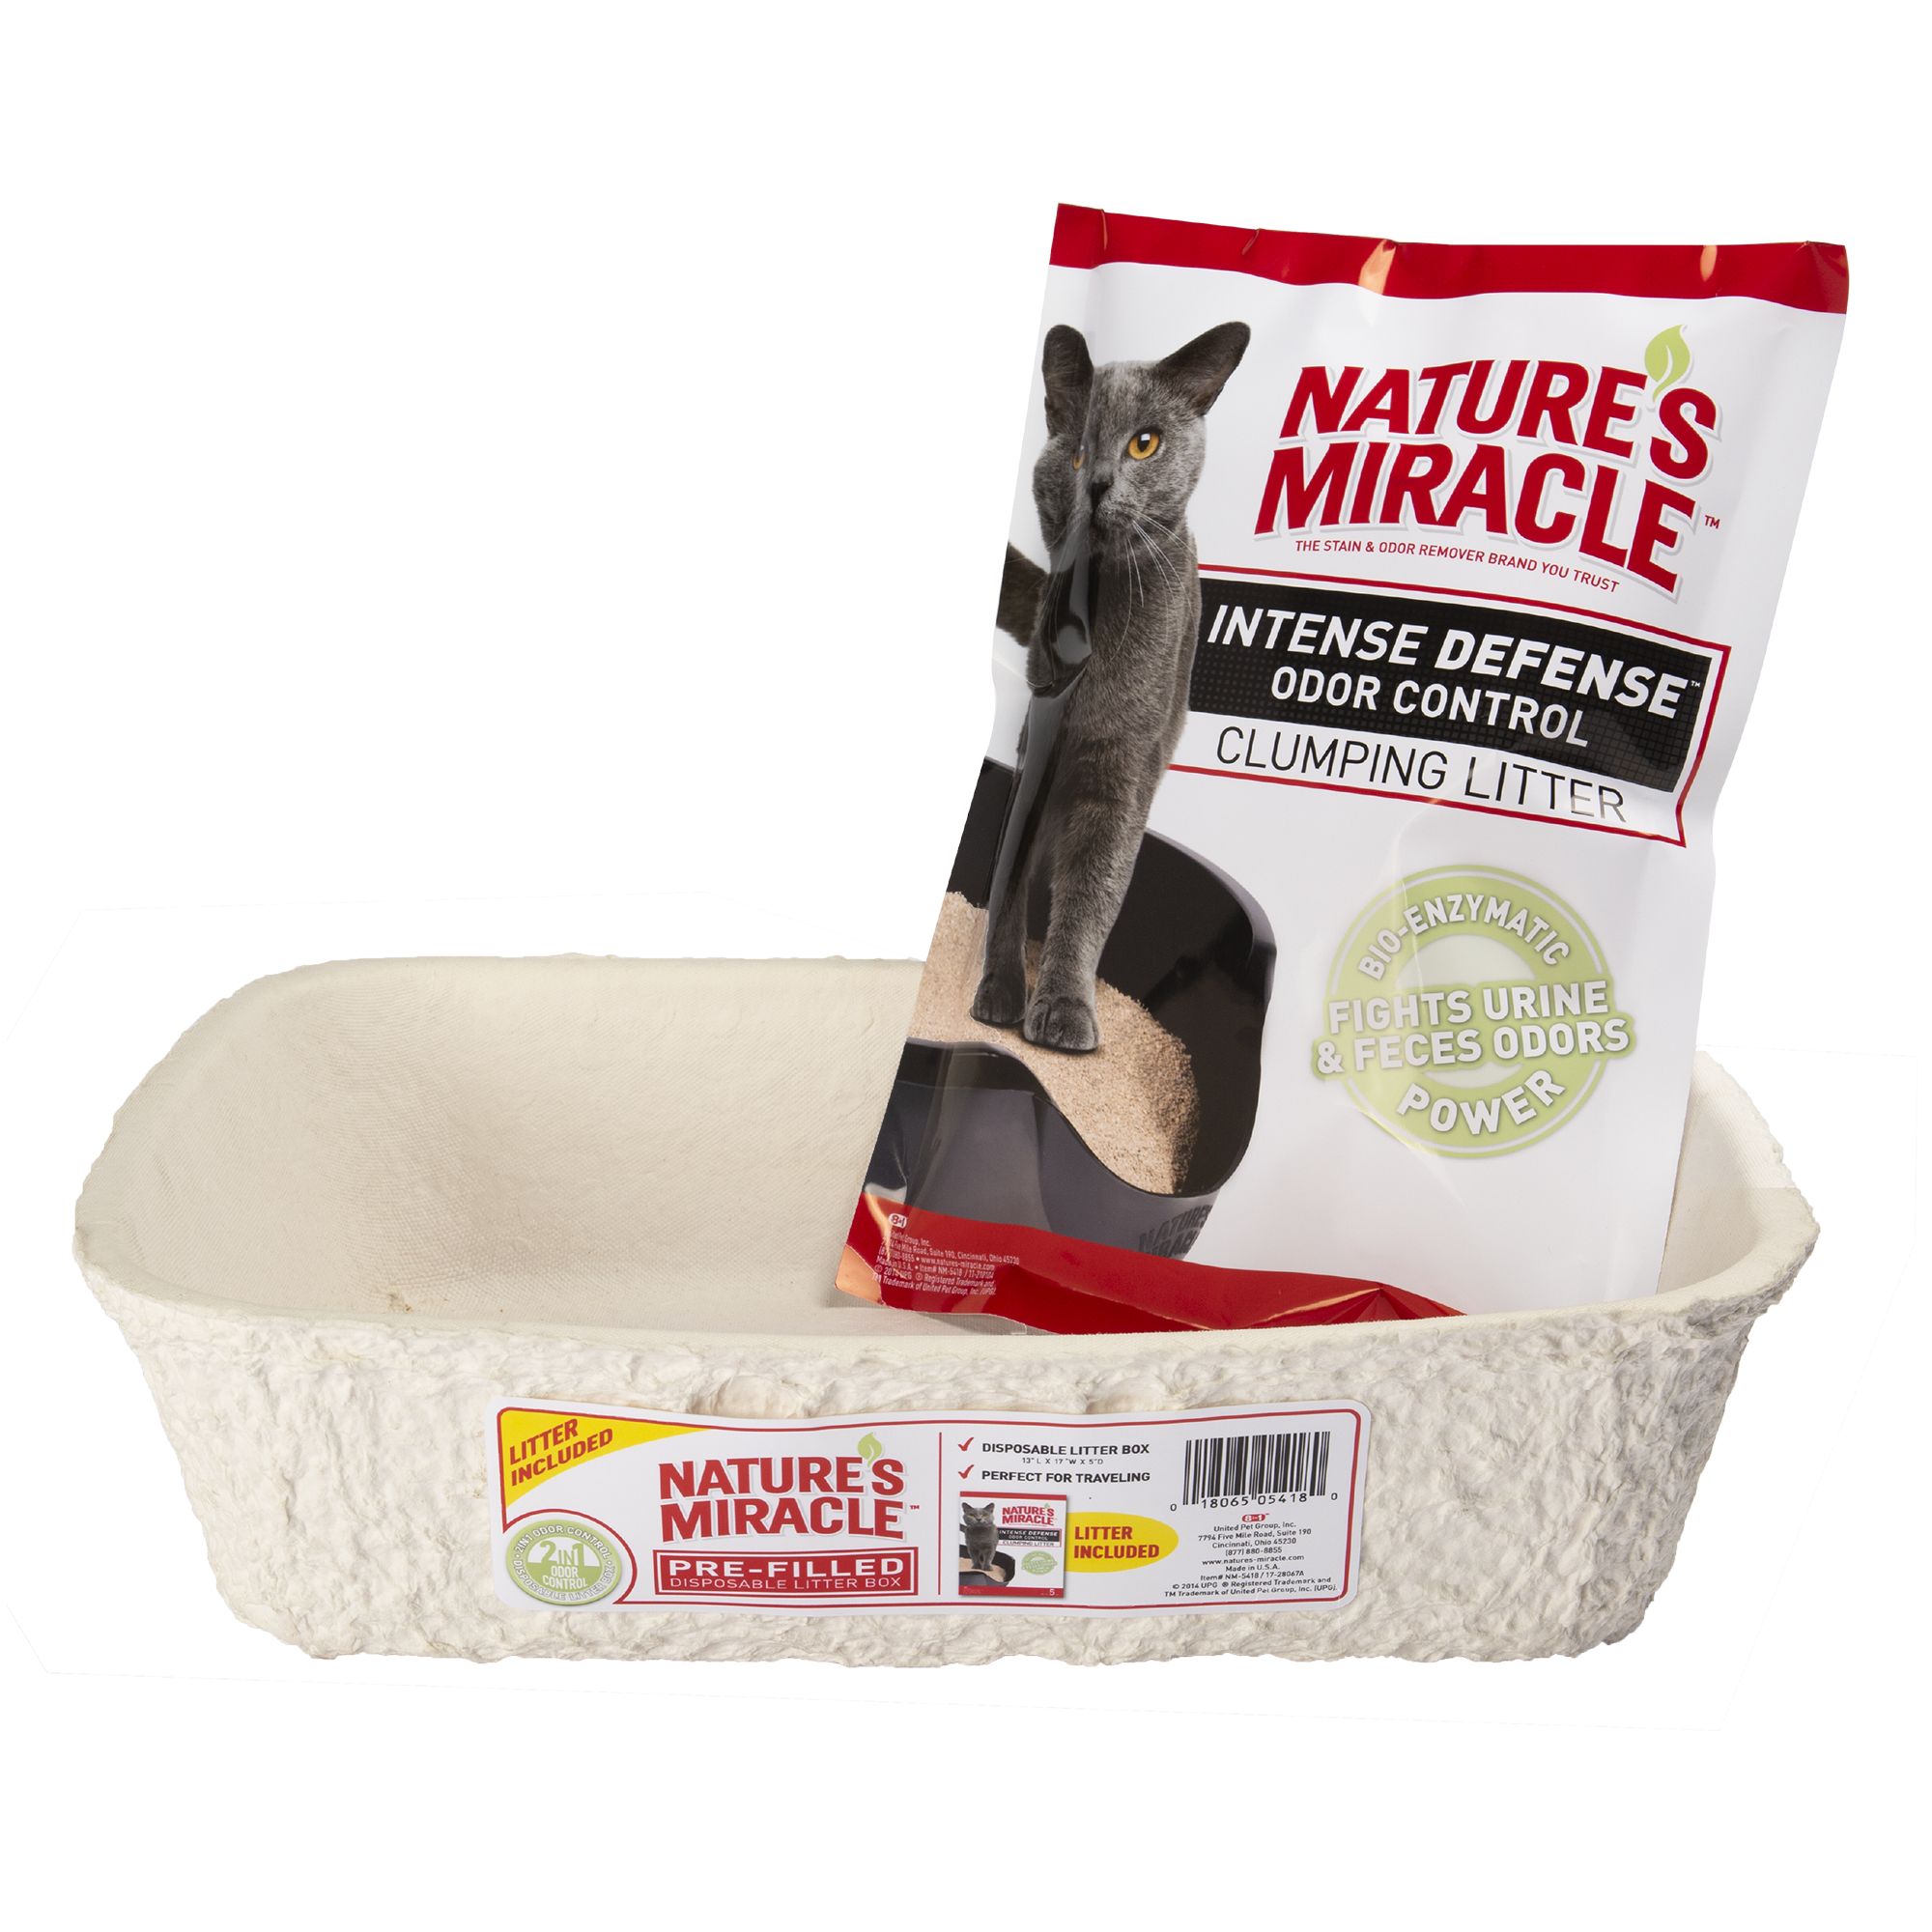 nature's miracle intense defense clumping litter